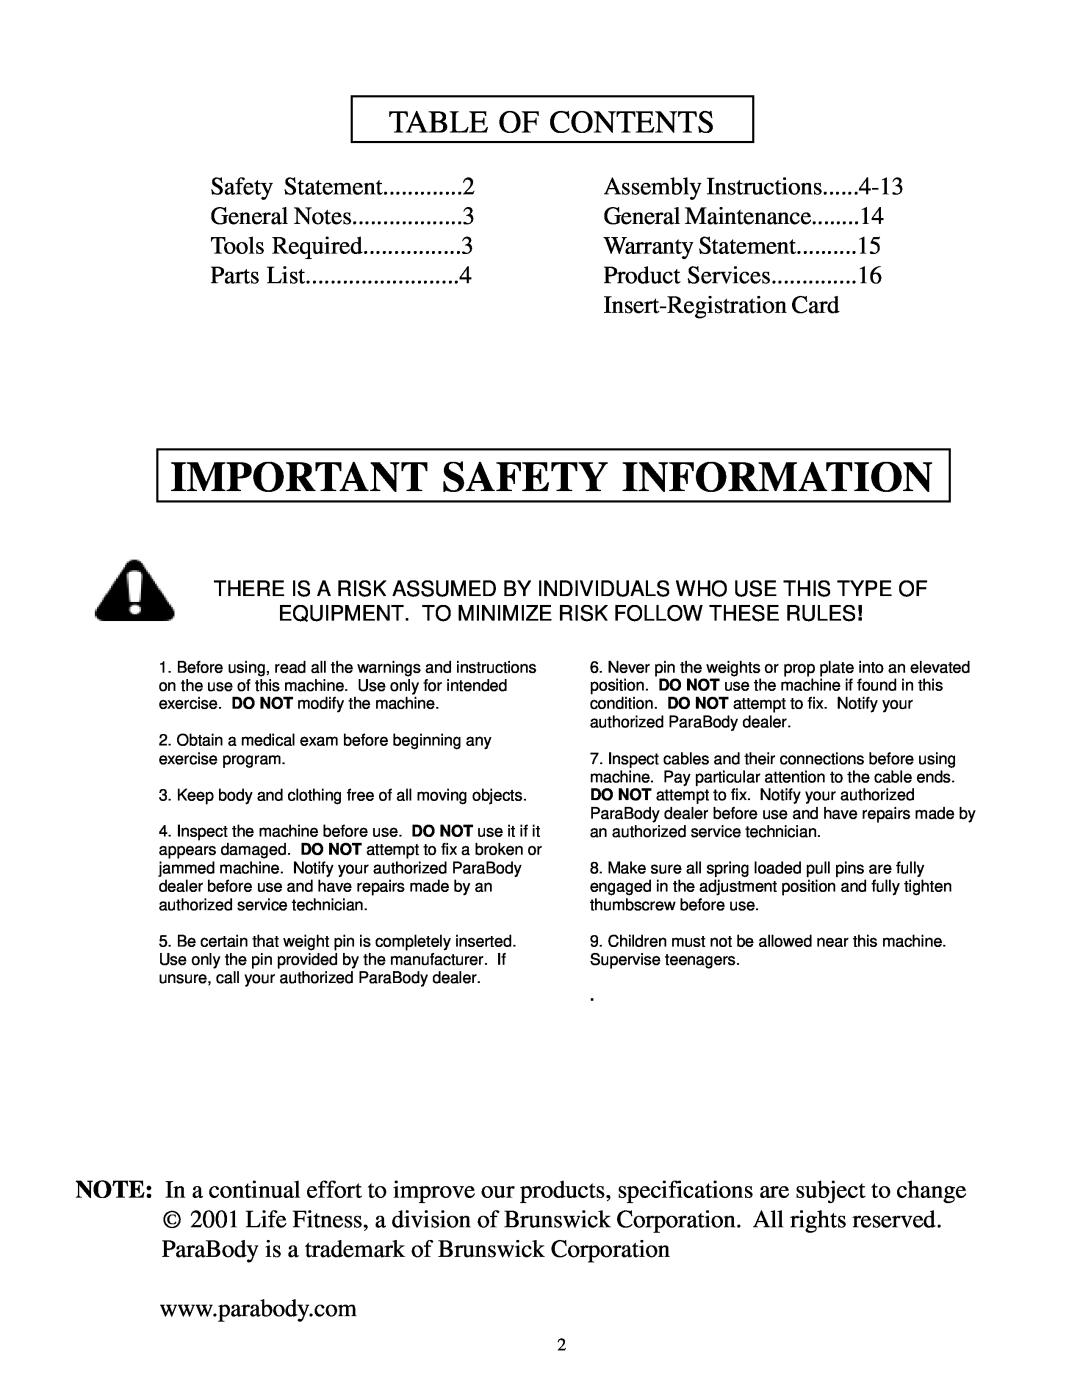 ParaBody 889 Important Safety Information, Table Of Contents, Assembly Instructions, General Maintenance, Product Services 